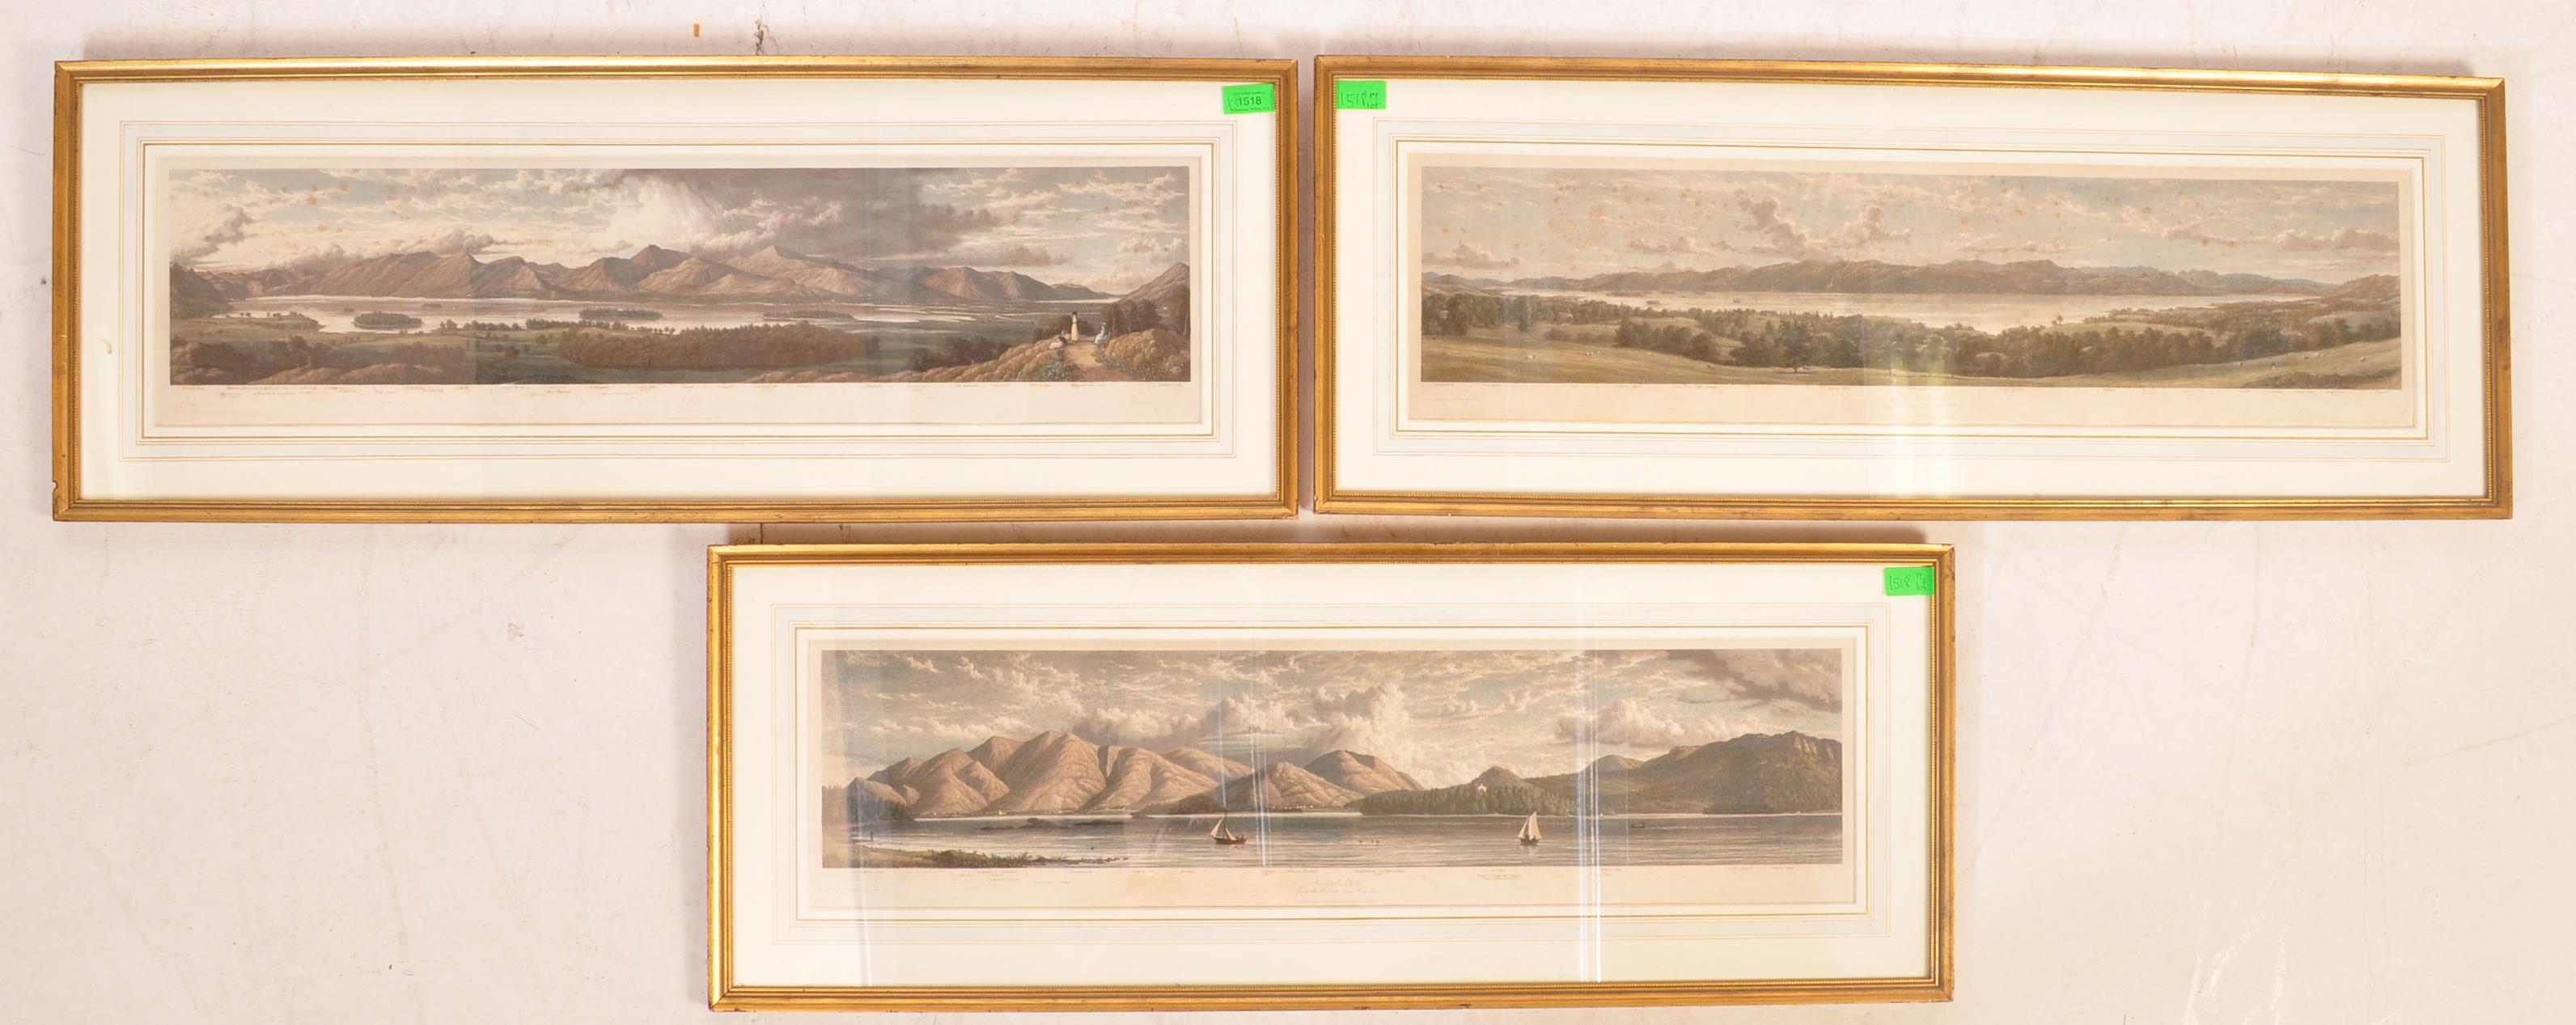 W WESTALL THREE 19TH CENTURY COLOUR ENGRAVINGS OF LAKE DISTRICT - Image 2 of 11